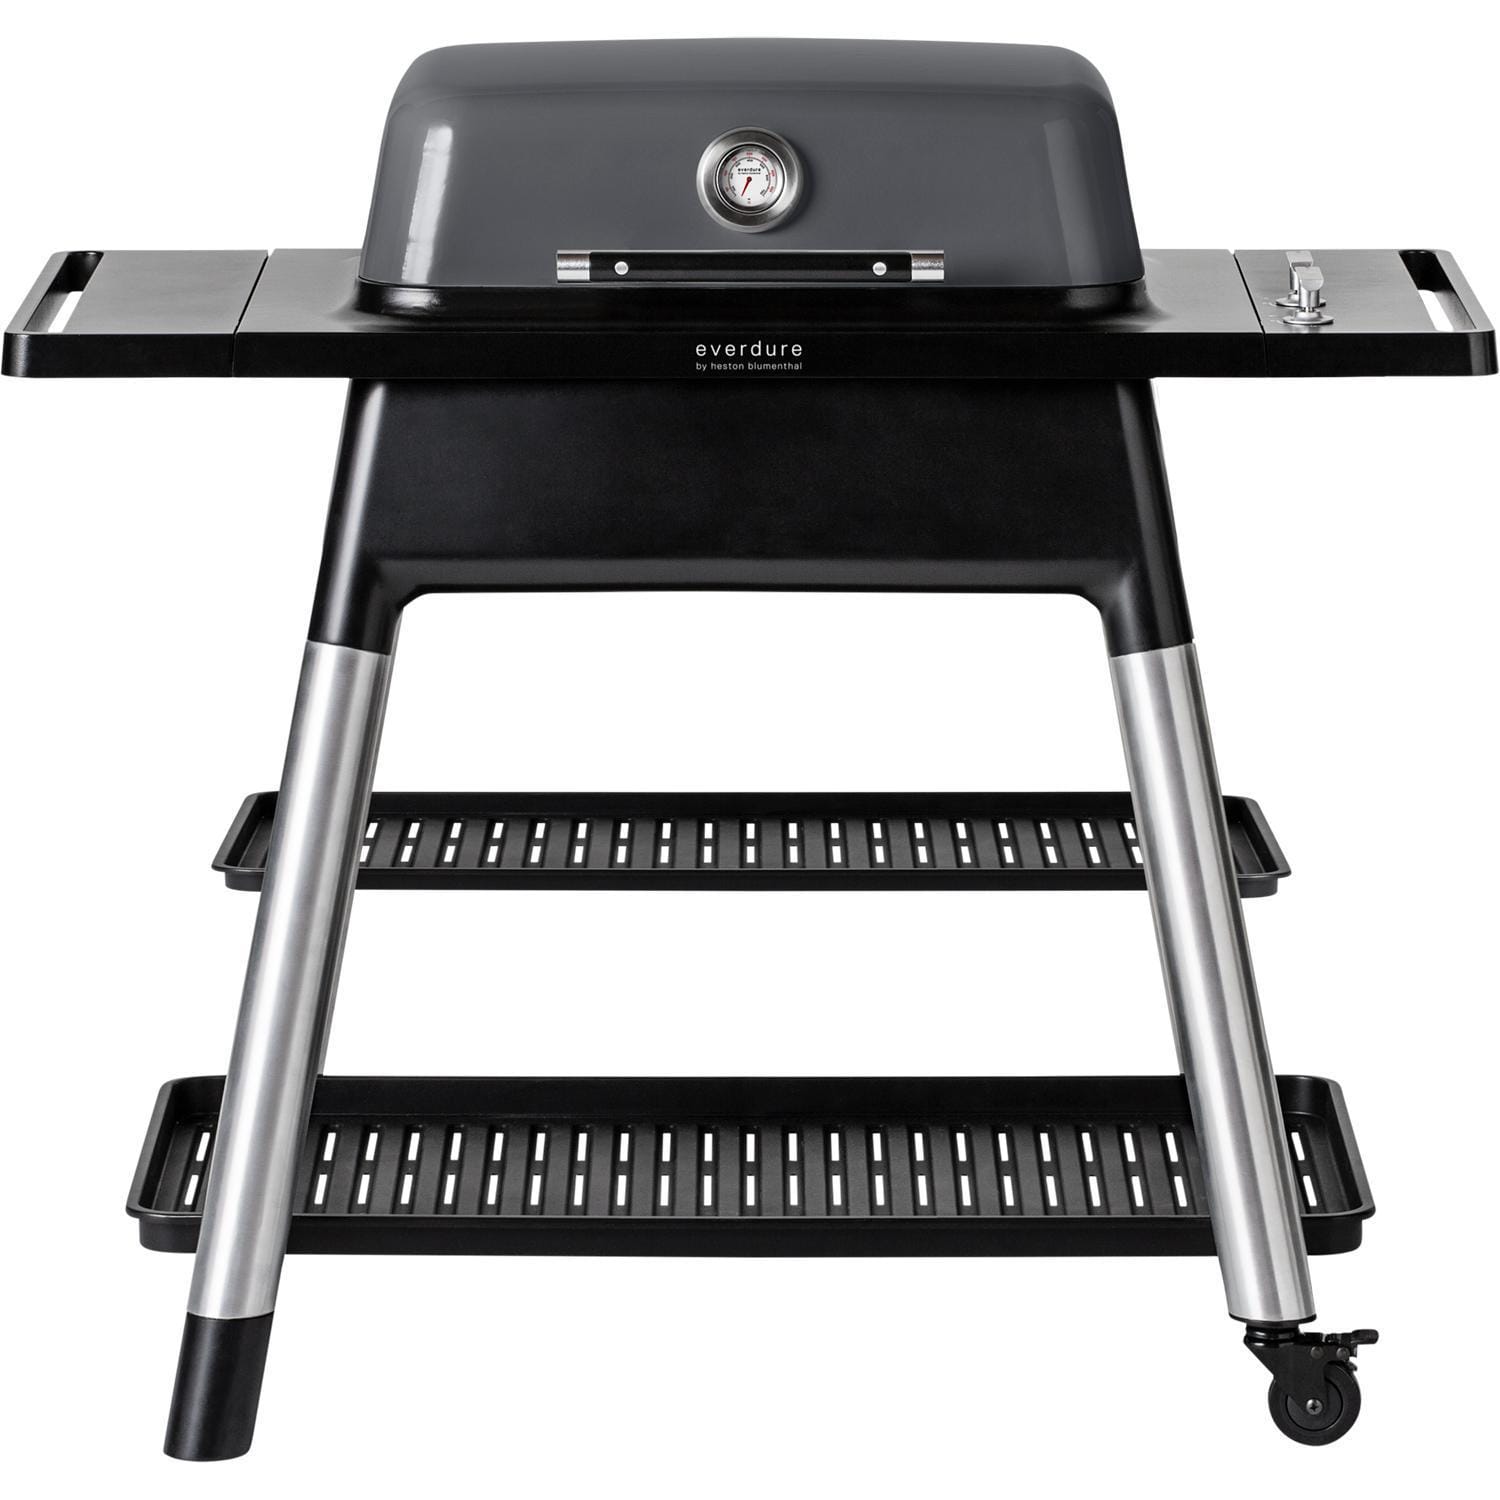 Everdure Propane Gas Grill Graphite Everdure By Heston Blumenthal FORCE 48-Inch 2-Burner Propane Gas Grill With Stand